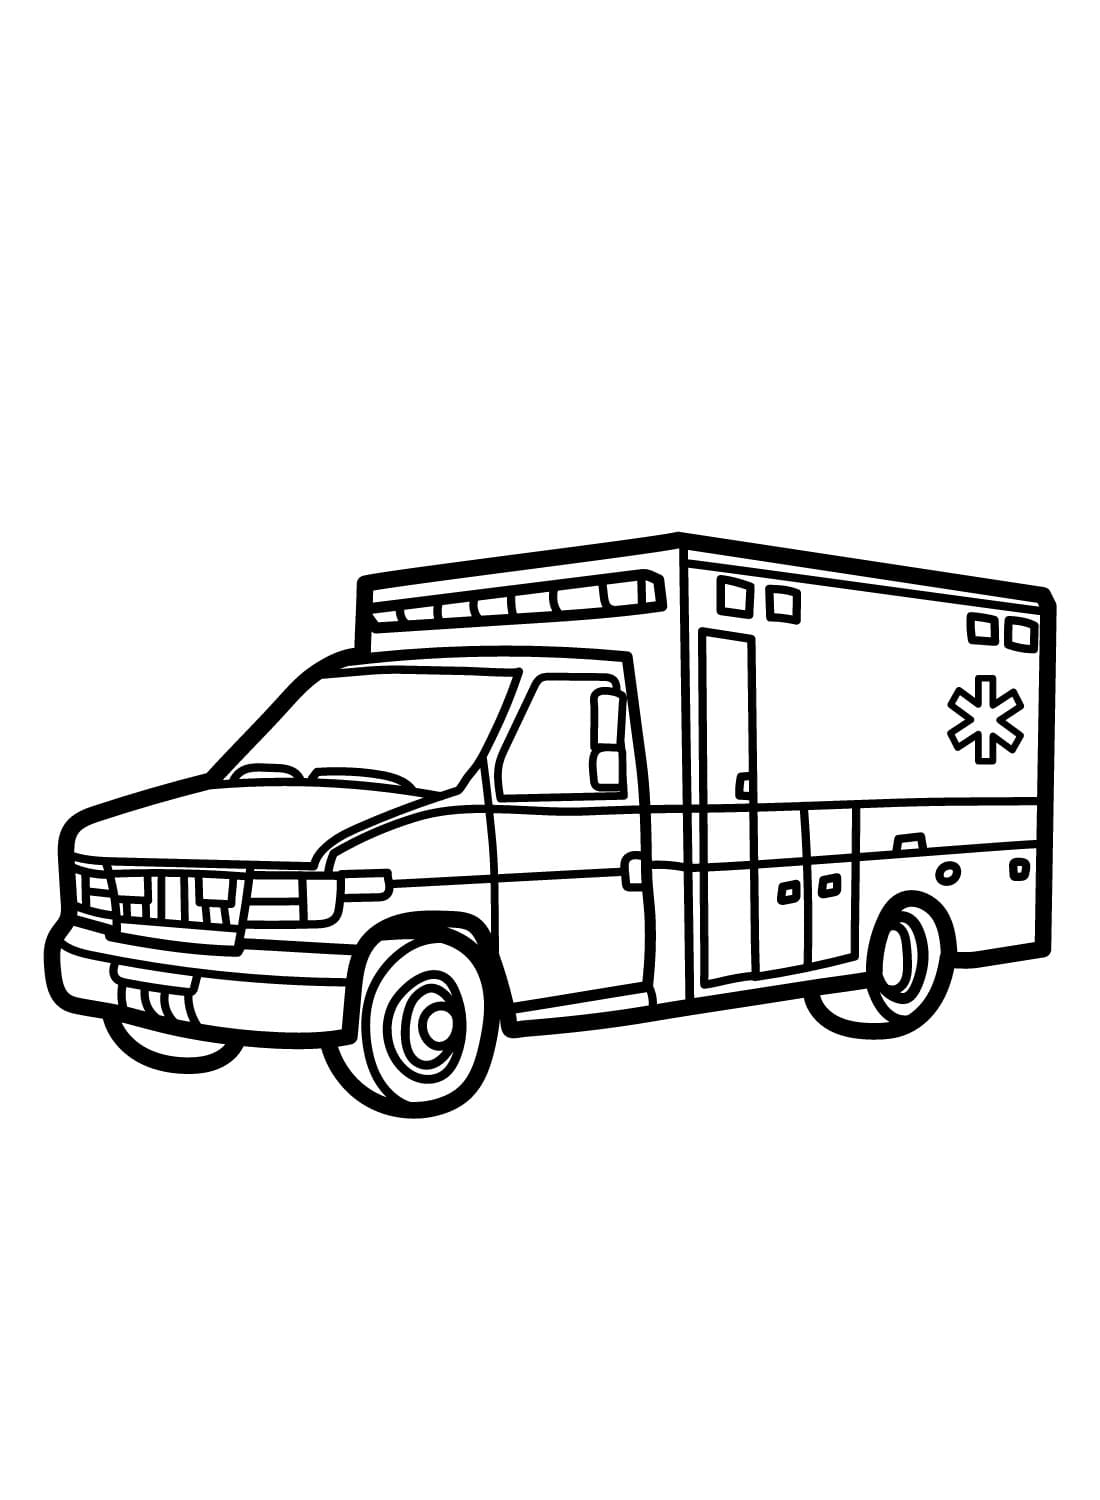 Free Ambulance coloring page - Download, Print or Color Online for Free